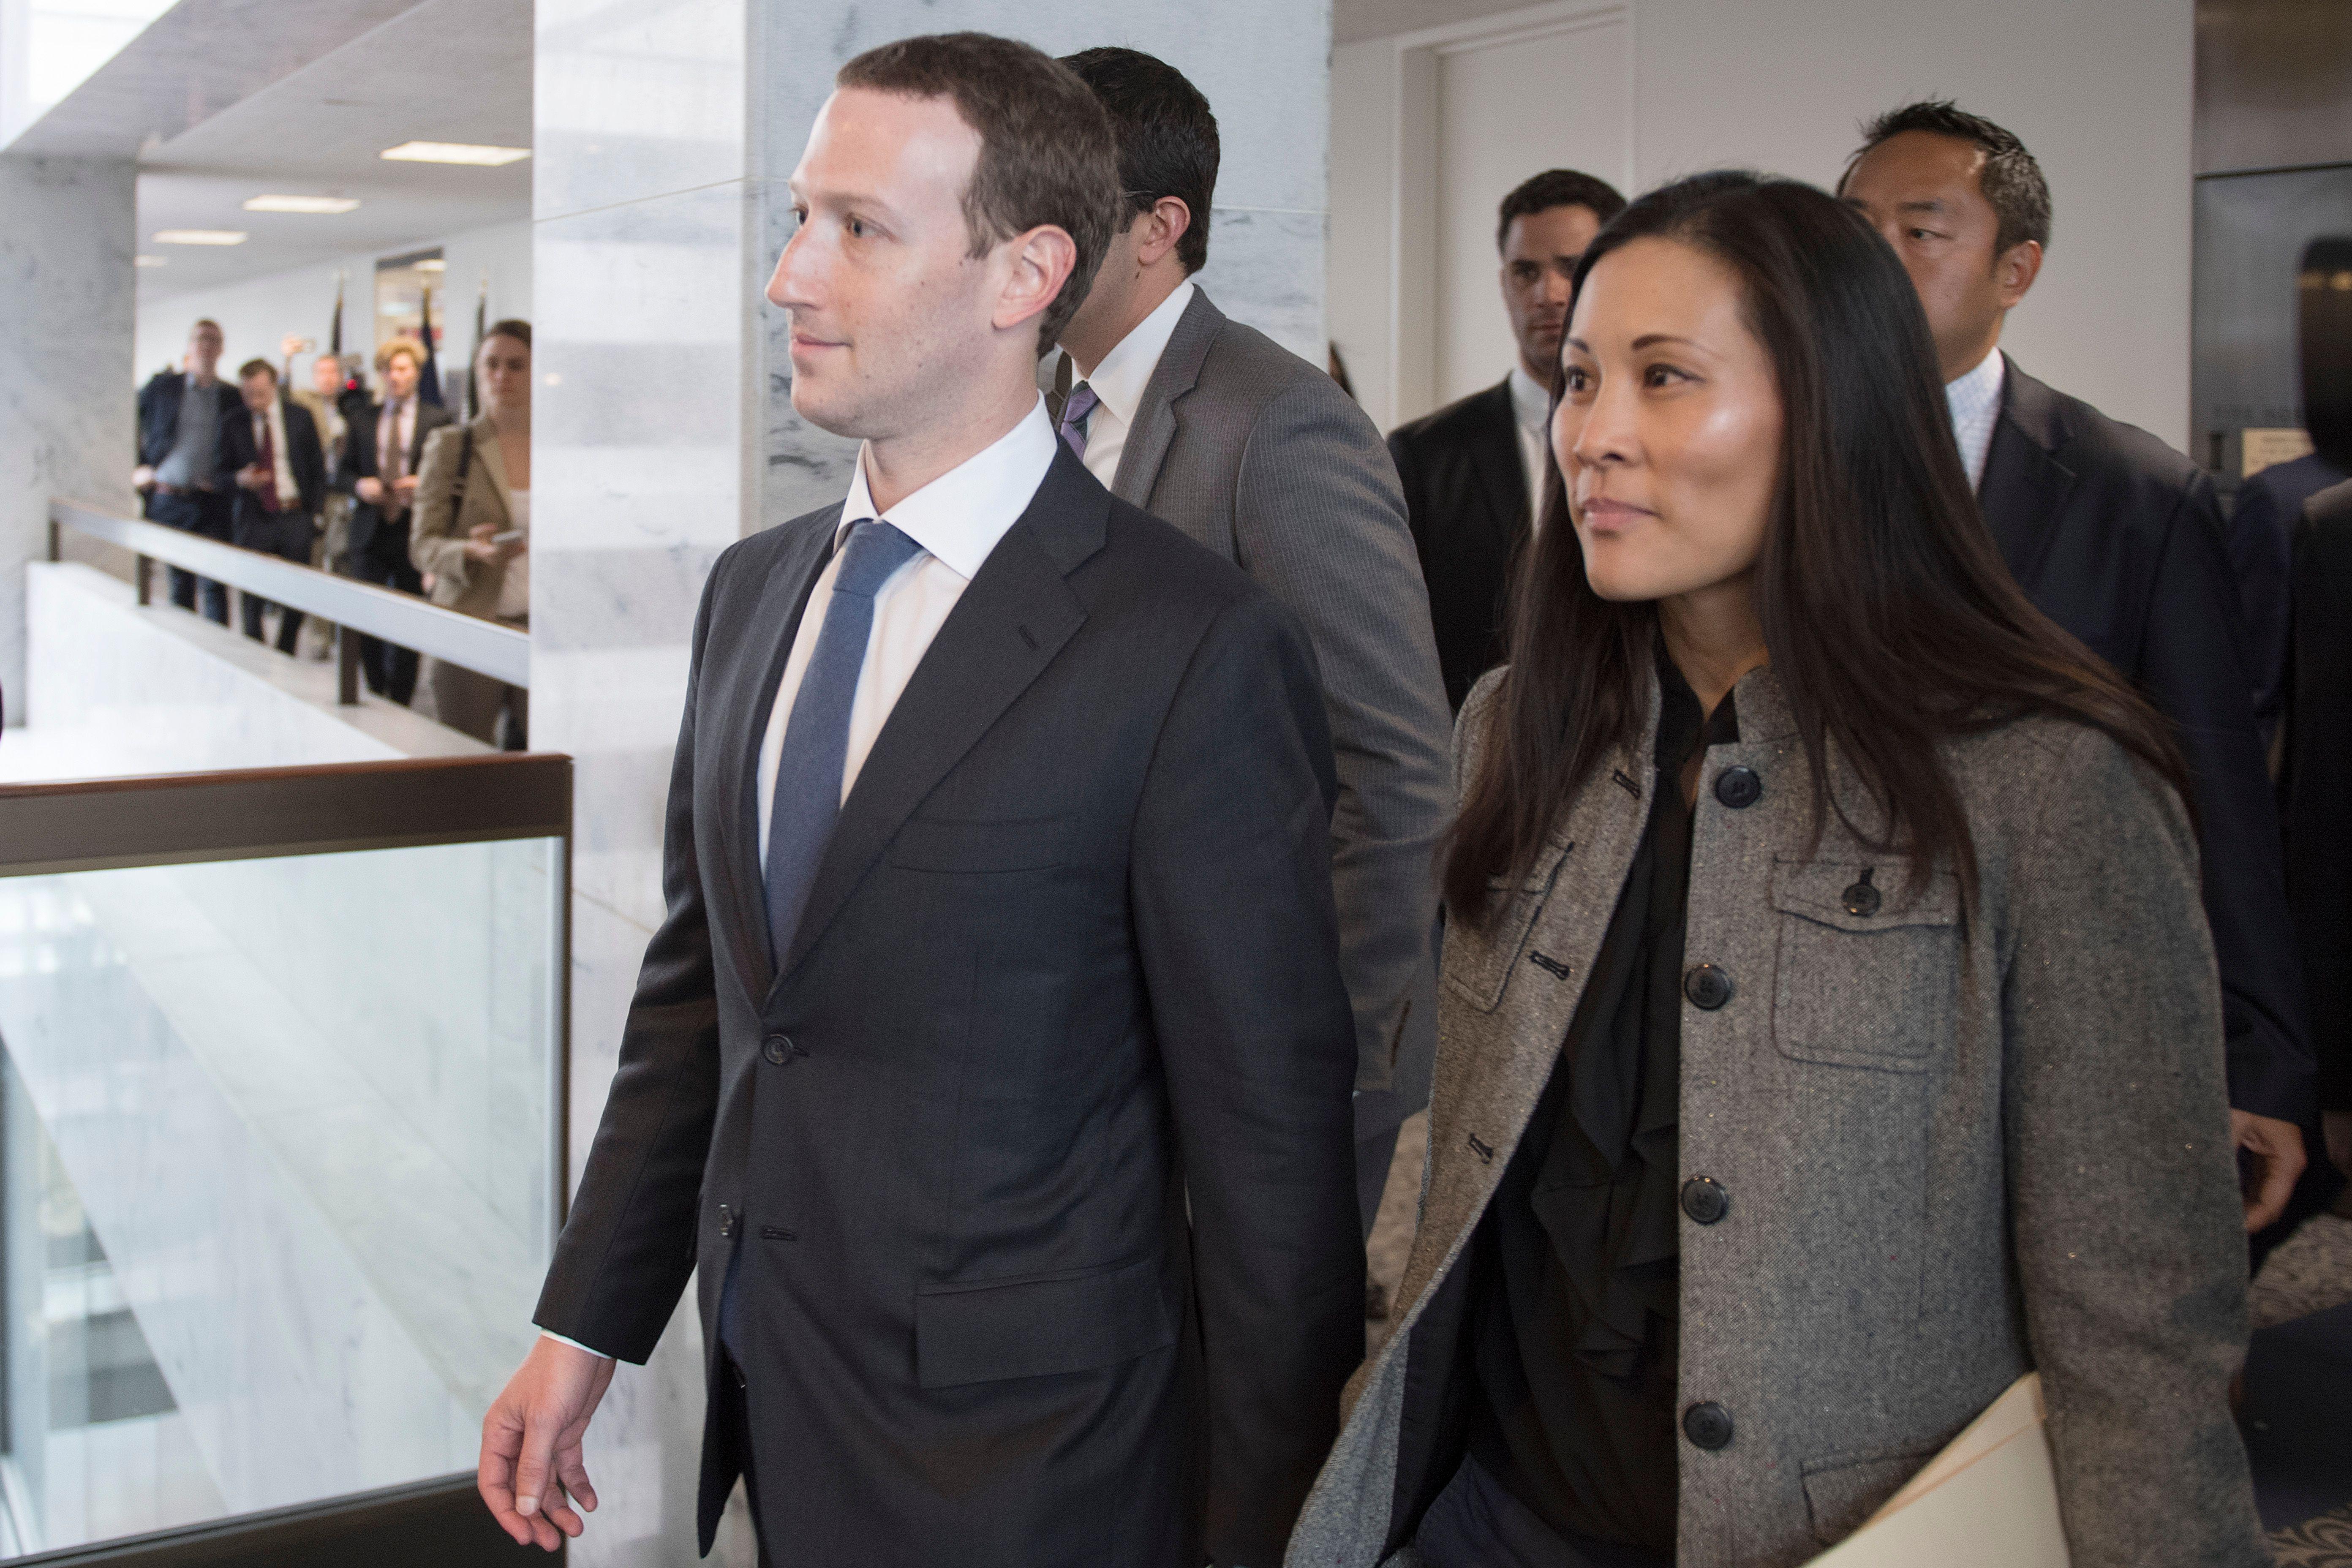 Mark Zuckerberg and Priscilla Chan (R) depart US Senator Bill Nelson's, D- Florida, office on Capitol Hill in Washington, DC, on April 9, 2018.Embattled Facebook chief Mark Zuckerberg has placed the blame for security lapses at the world's largest social network squarely on himself as he girded Monday for appearances this week before angry lawmakers.In prepared remarks released by a congressional panel, Zuckerberg admitted he was too idealistic and failed to grasp how the platform -- used by two billion people -- could be abused and manipulated. / AFP PHOTO / JIM WATSON